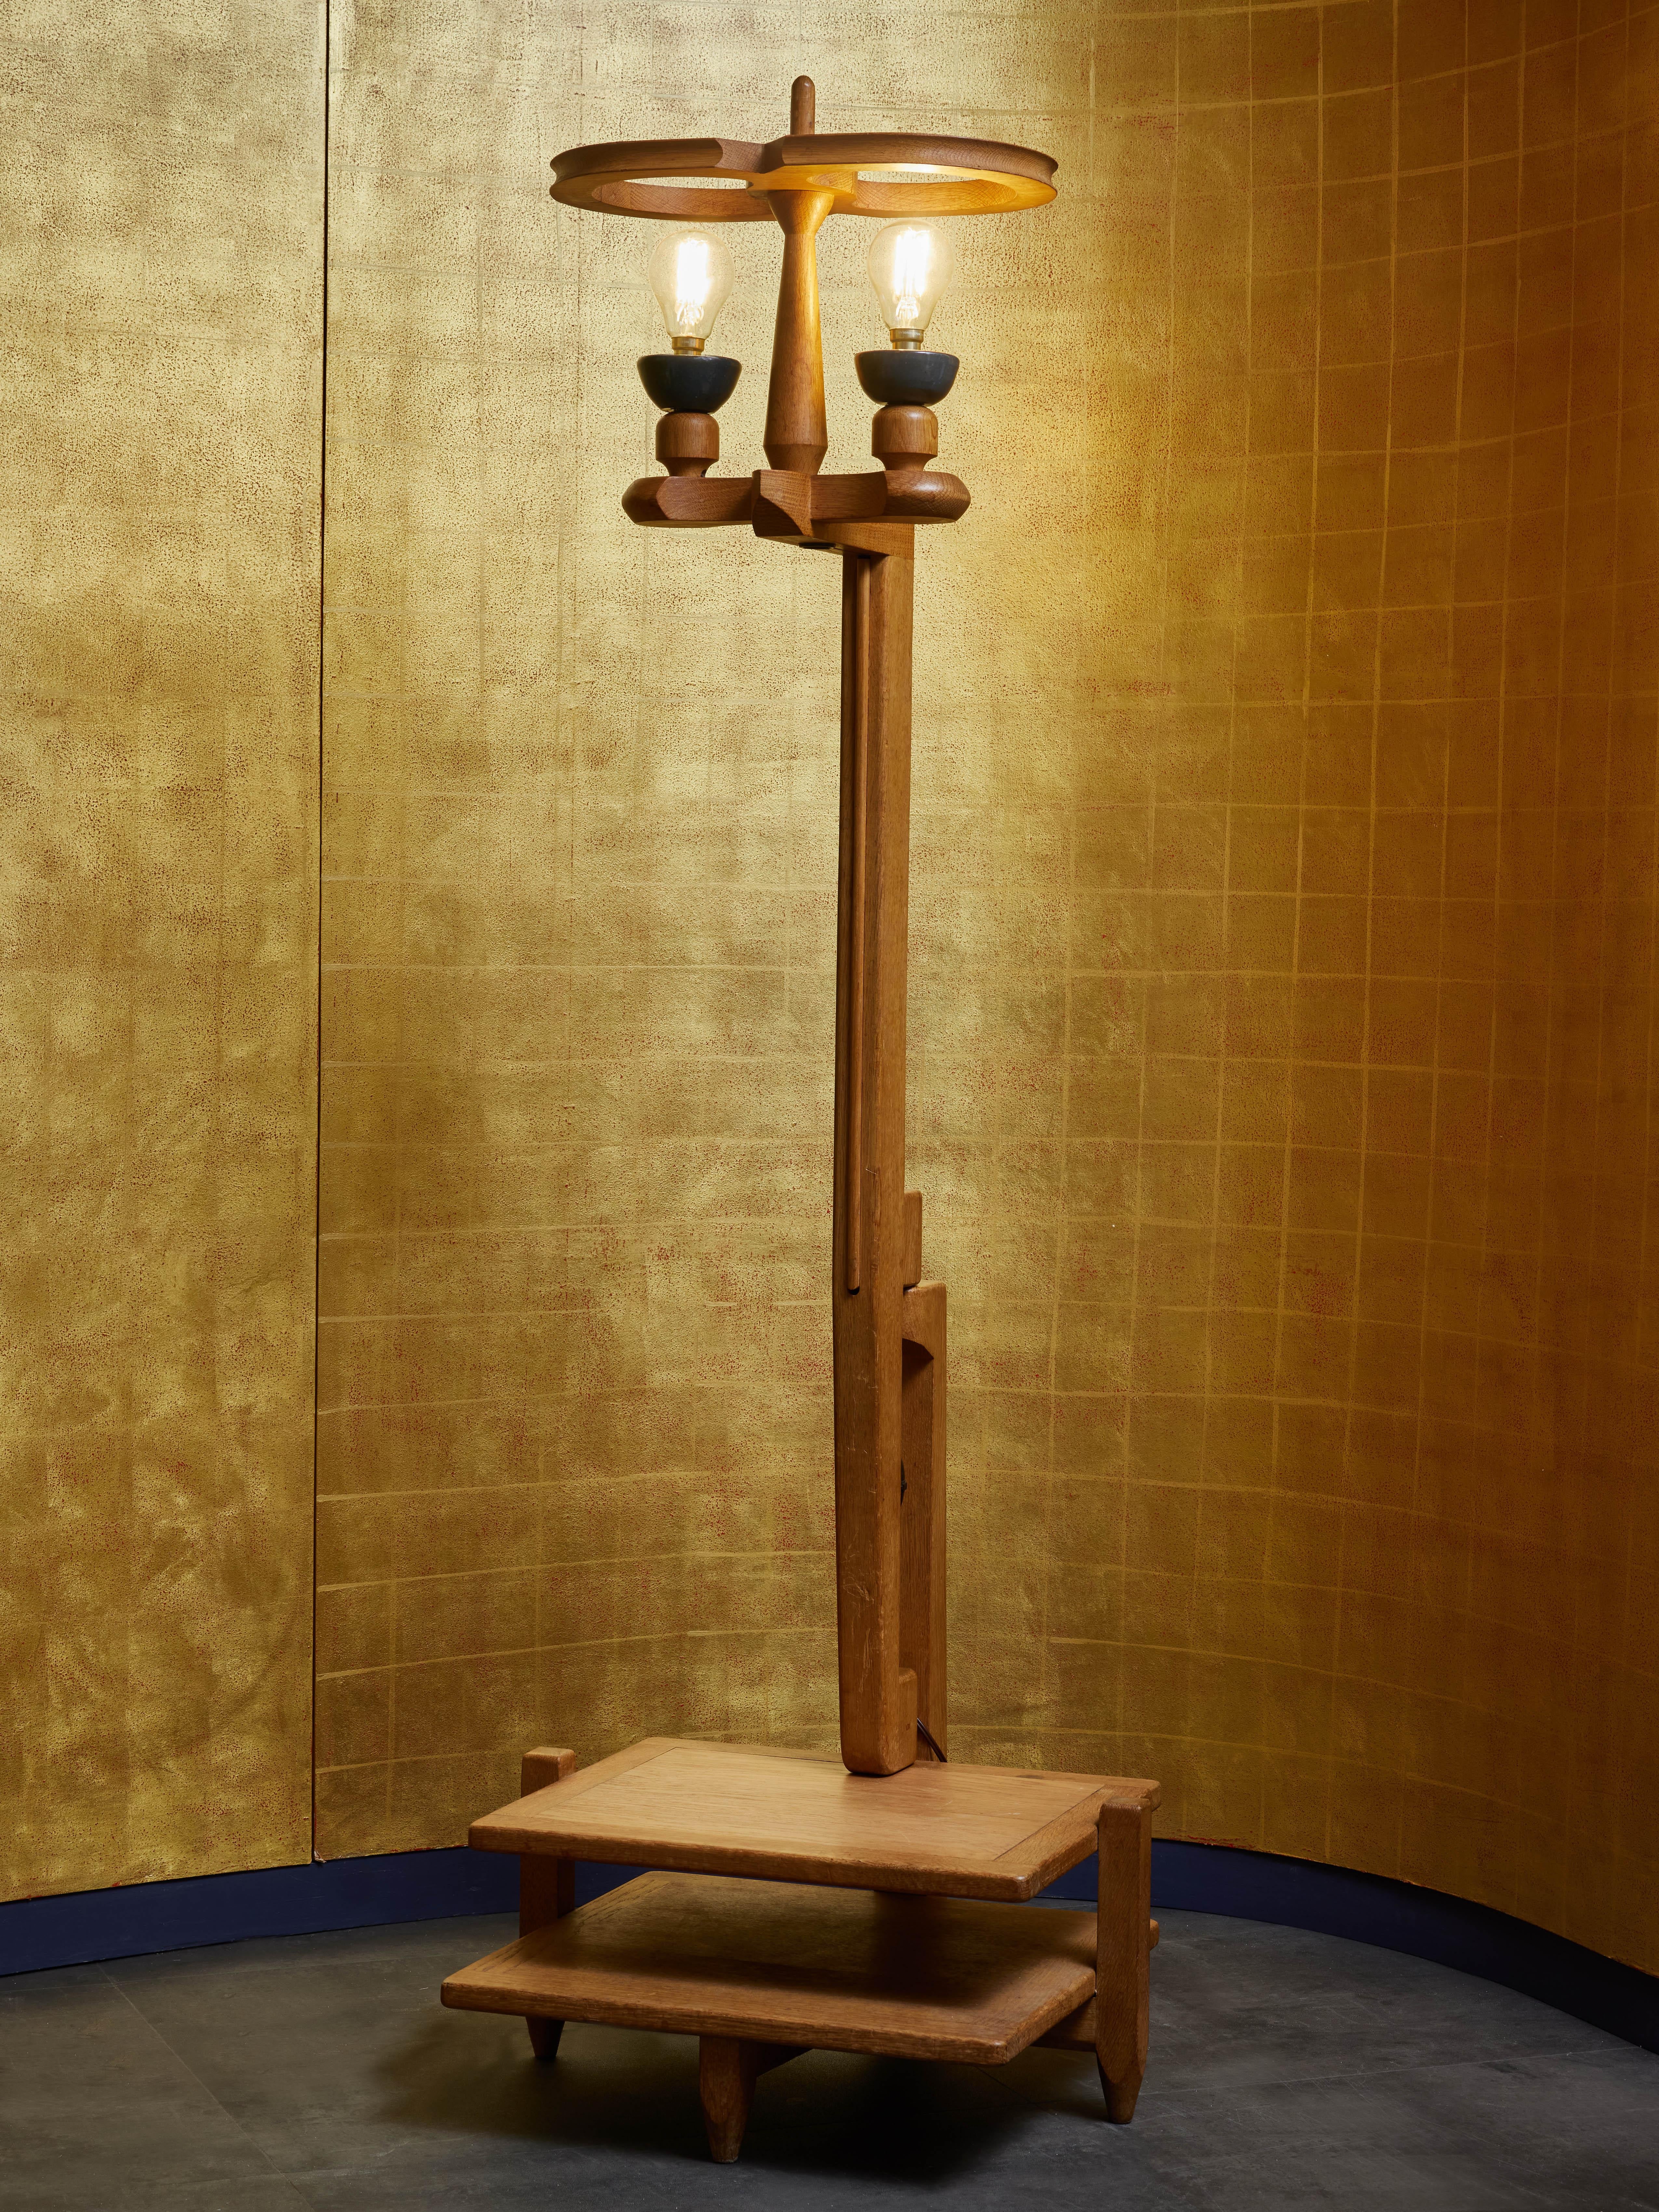 Vintage floor lamp designed by Guillerme et Chambron for their maison d'edition Votre Maison.

Made of oak wood, this floor lamp has a built in double tray at the bottom, rotating center piece and Danikowski ceramic bulb holder.